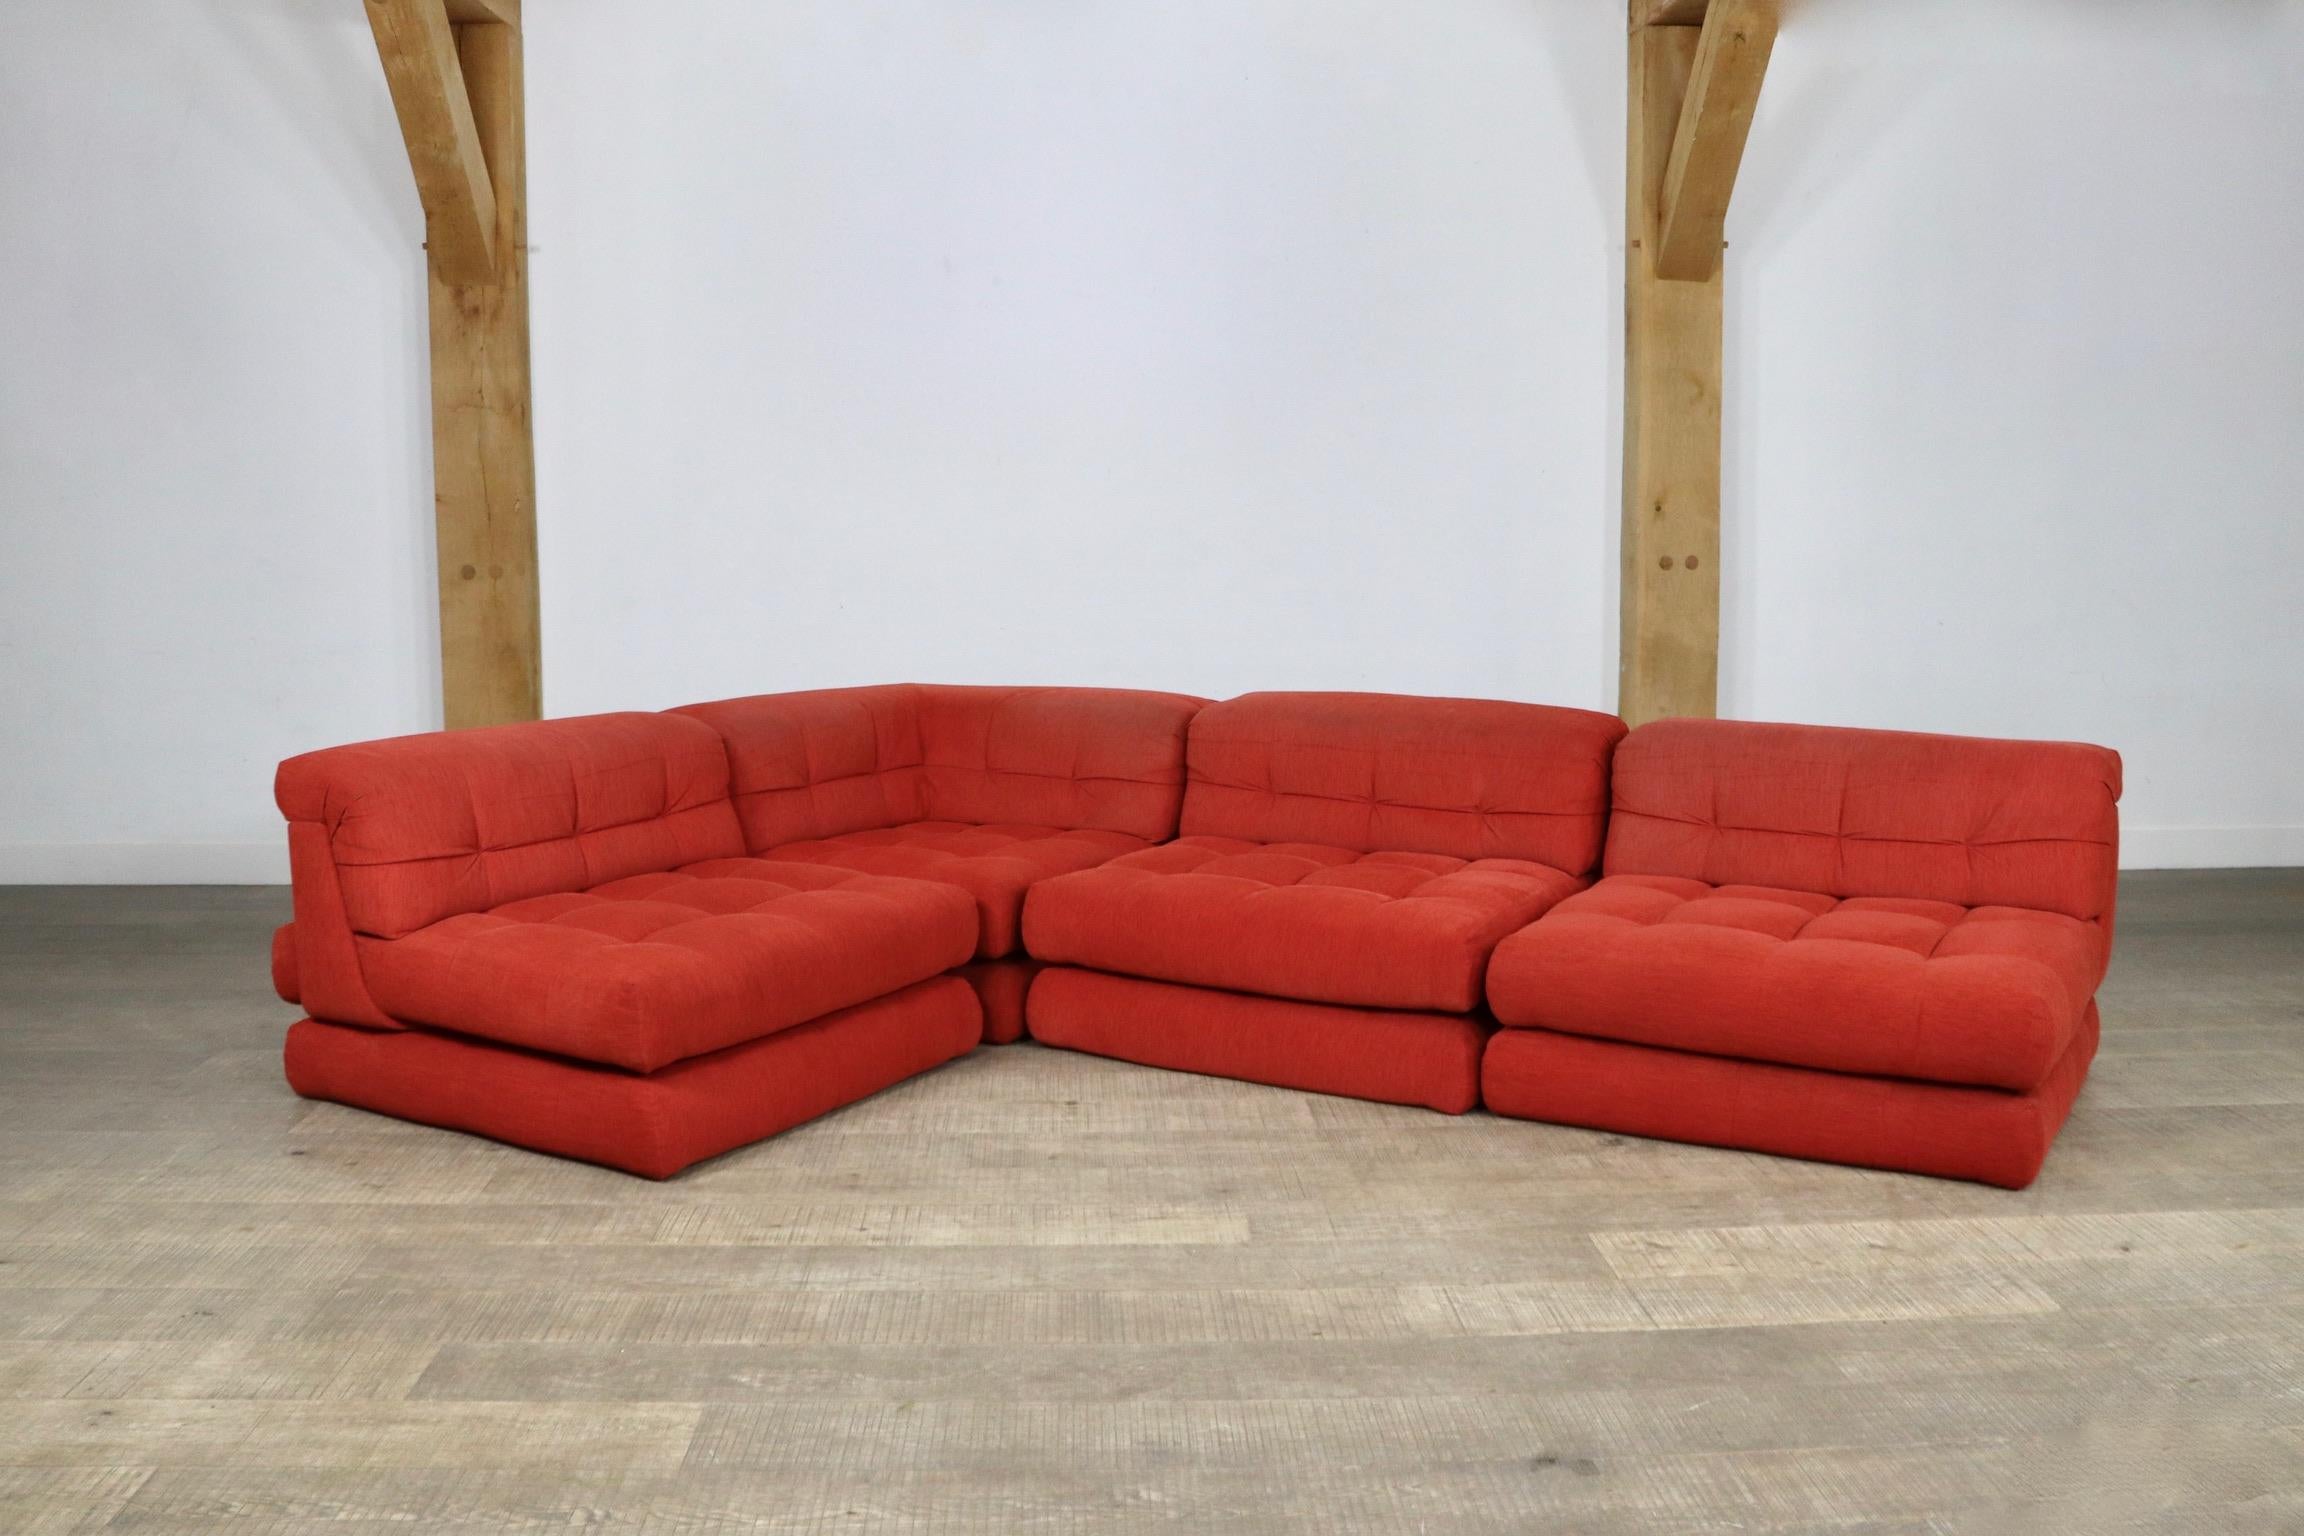 Incredible Roche Bobois first edition Mah Jong modular sofa from the 1970s by Hans Hopfer and Philippe Roche in original red velvet upholstery. In the 1970s Hans Hopfer created the Mah Jong lounge sofa, Roche Bobois’s most recognized and iconic